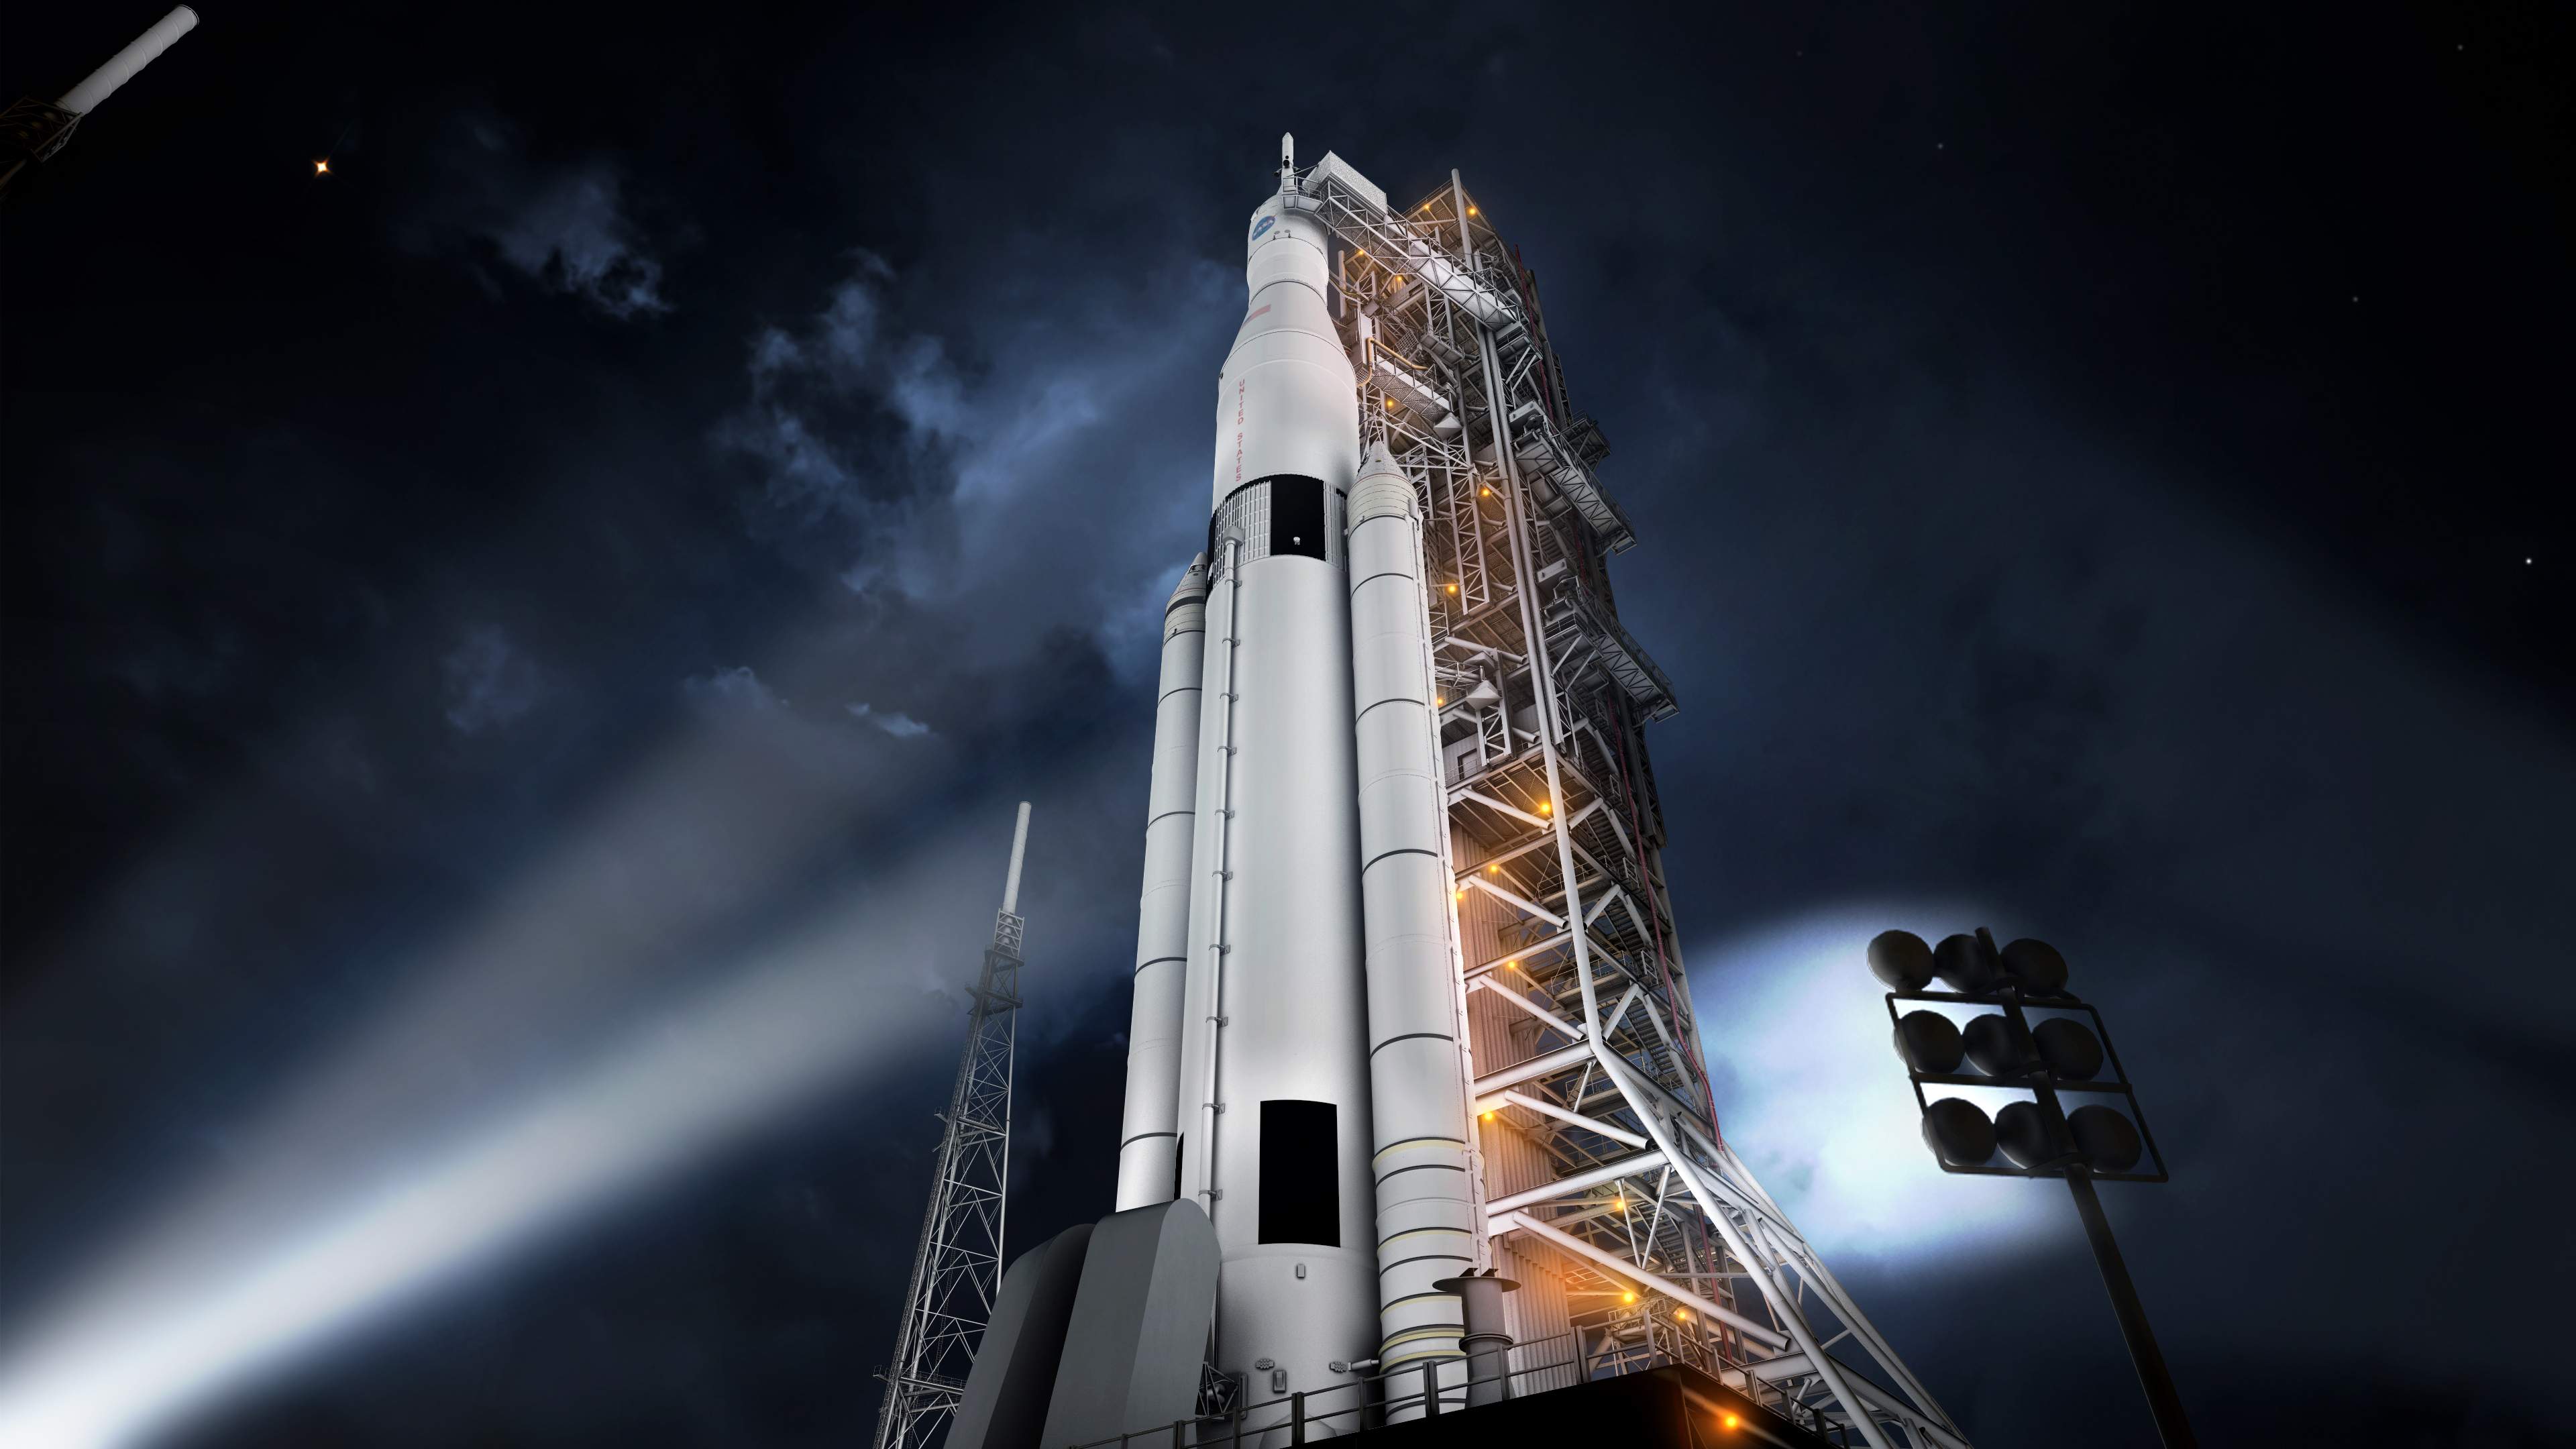 NASA's Heavy Lift Rocket Is Plagued With Problems